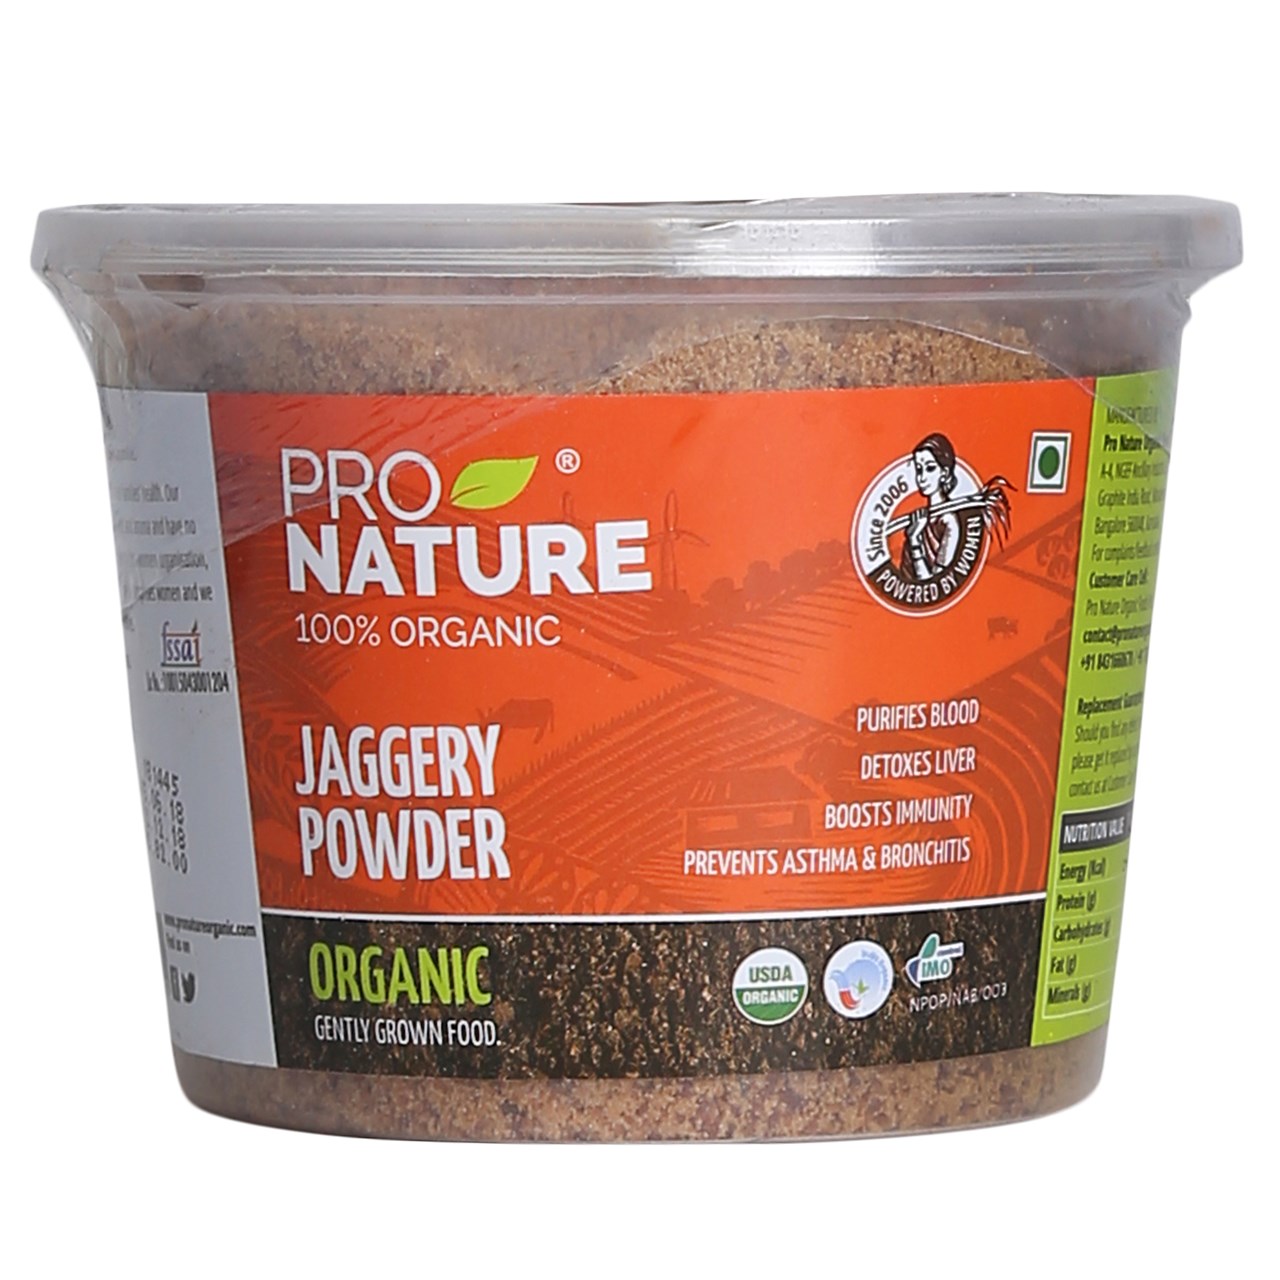 Picture of Pro Nature 100% Organic Jaggery Powder 300g (Tub)